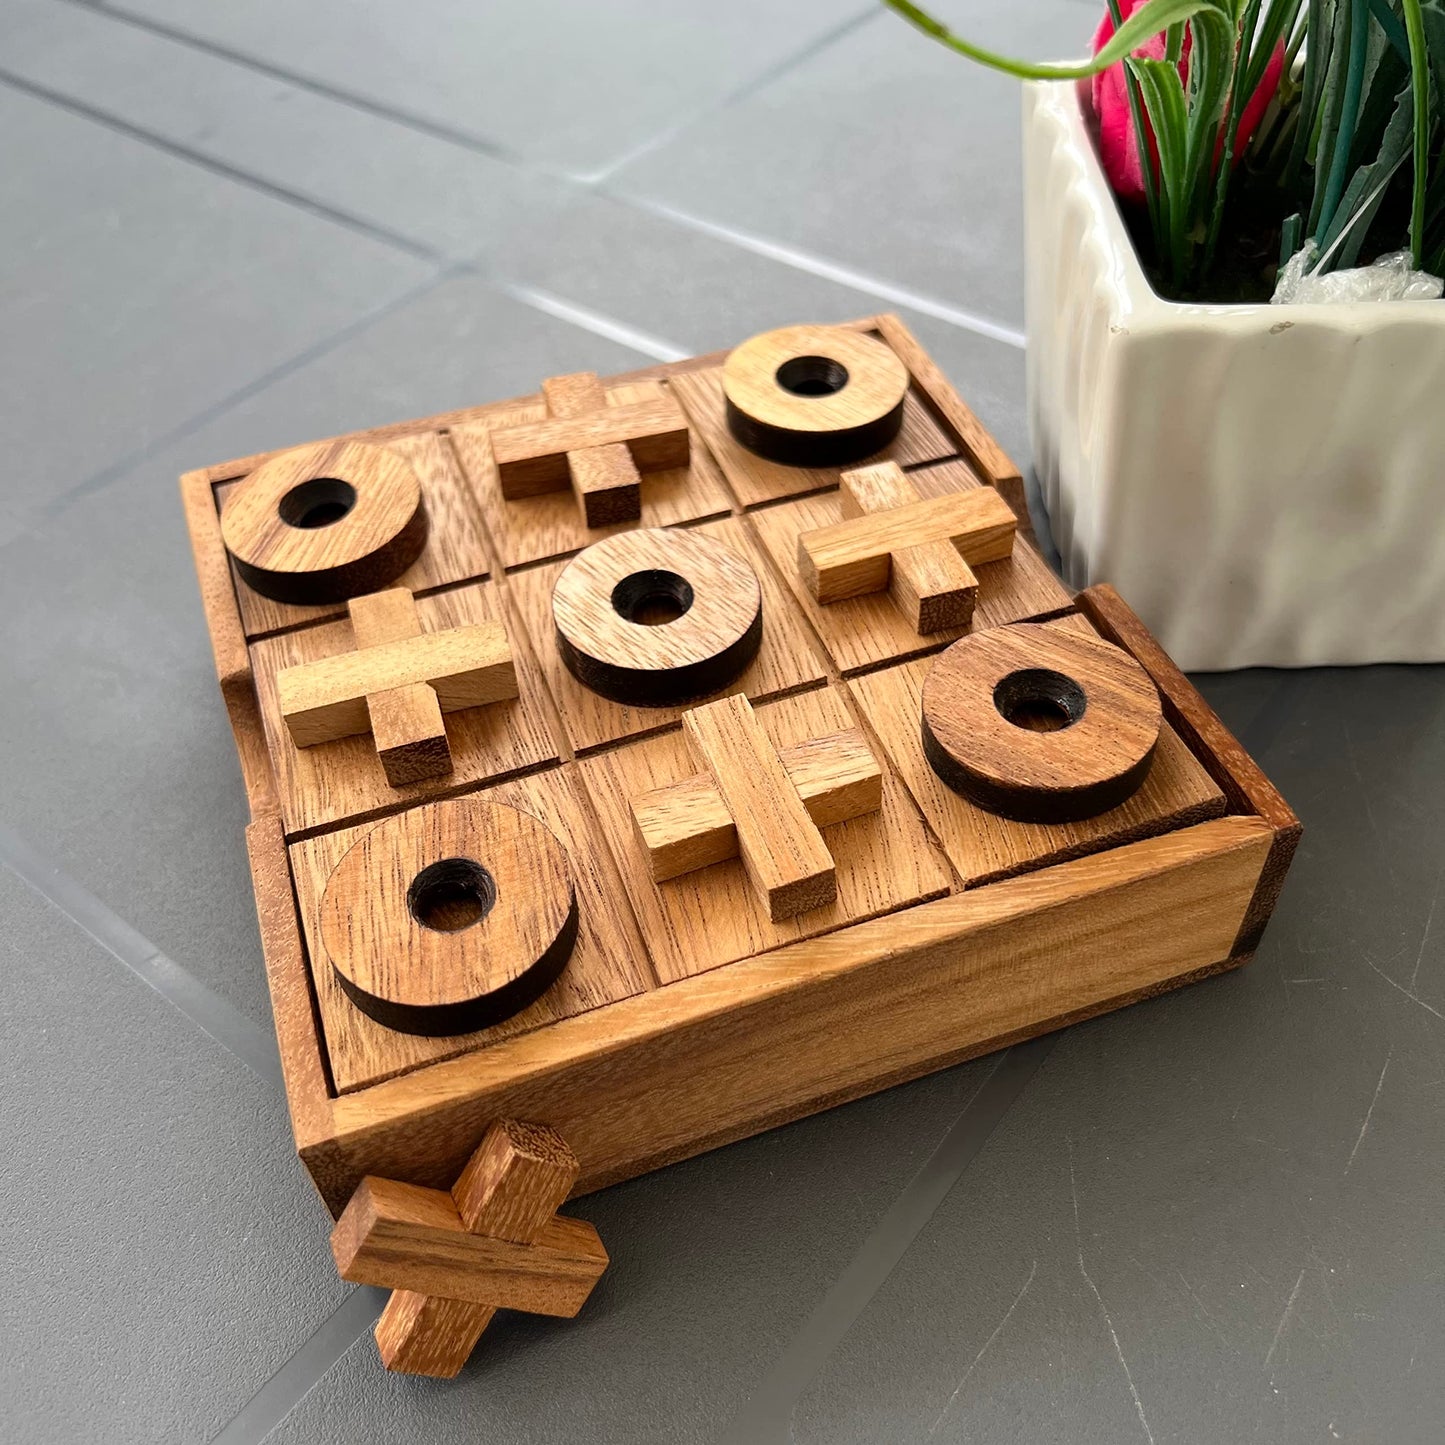 NUTTA - TicTacToe Tic Tac Toe Wooden Board XO OX Games Coffee Table Desk Toy Fun Game with Friends and Family Adult Games Travel Backyard Indoor